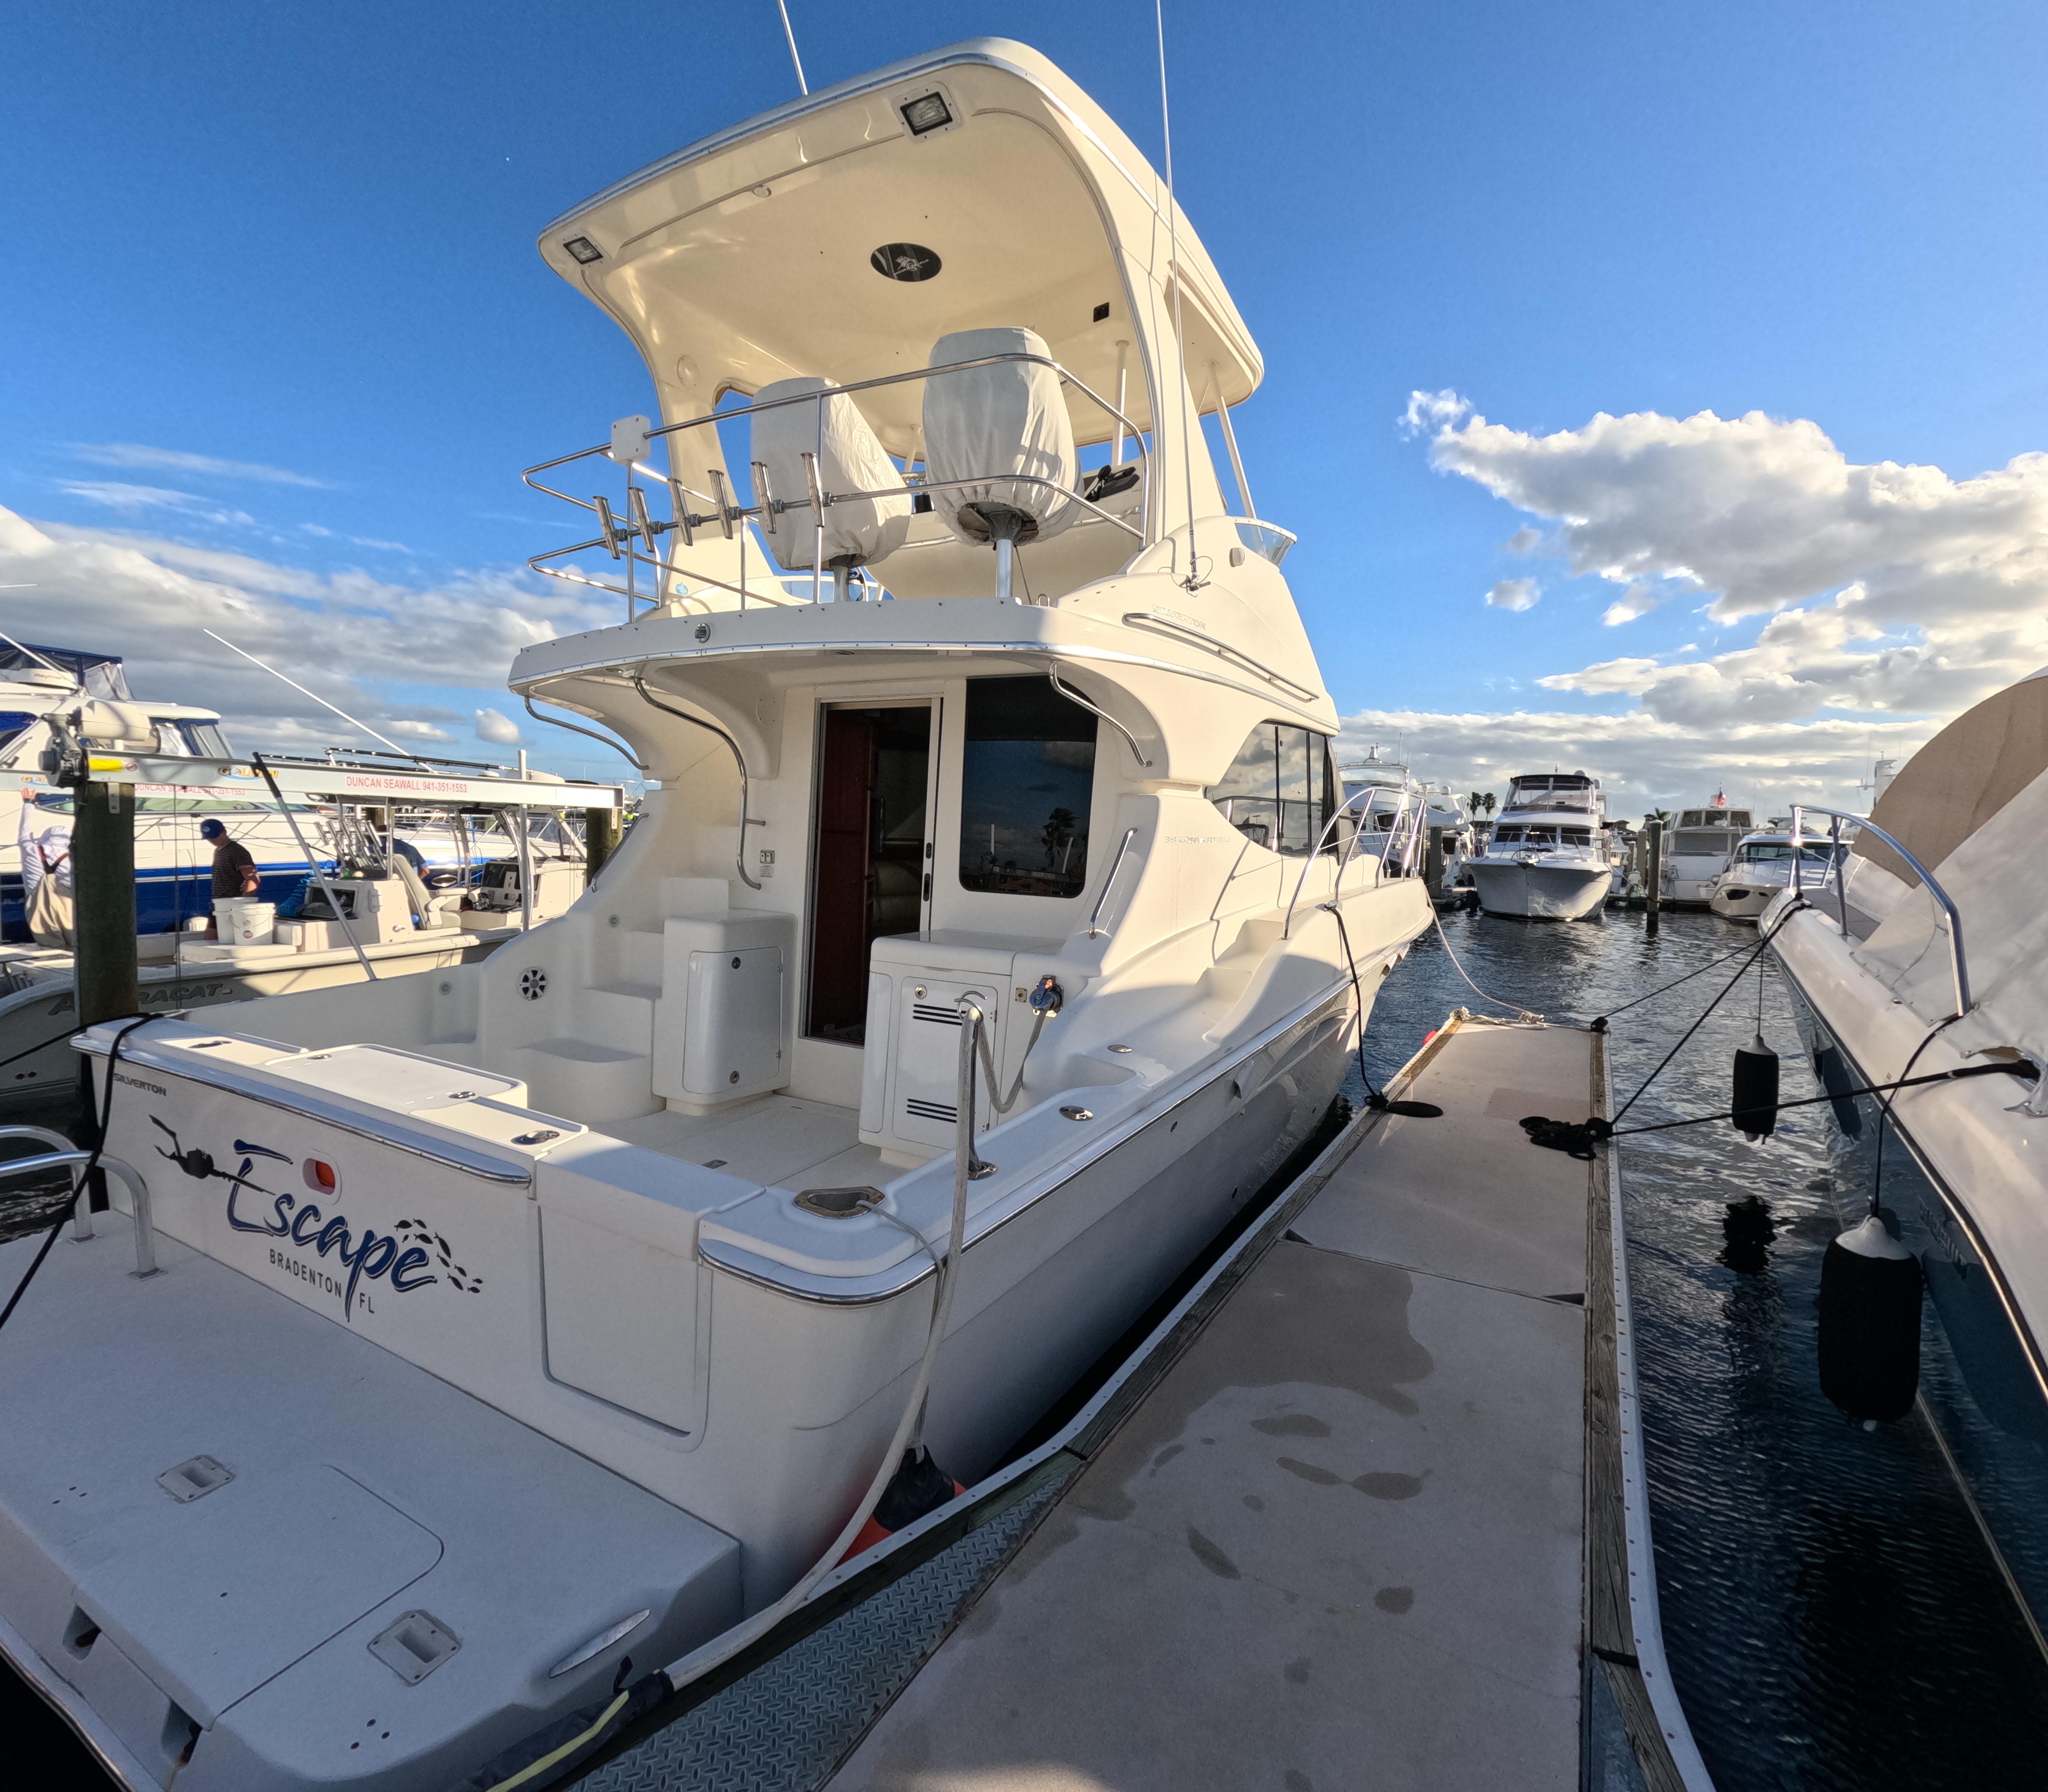 Saltwater Fishing boats for sale in New Jersey by owner - Boat Trader